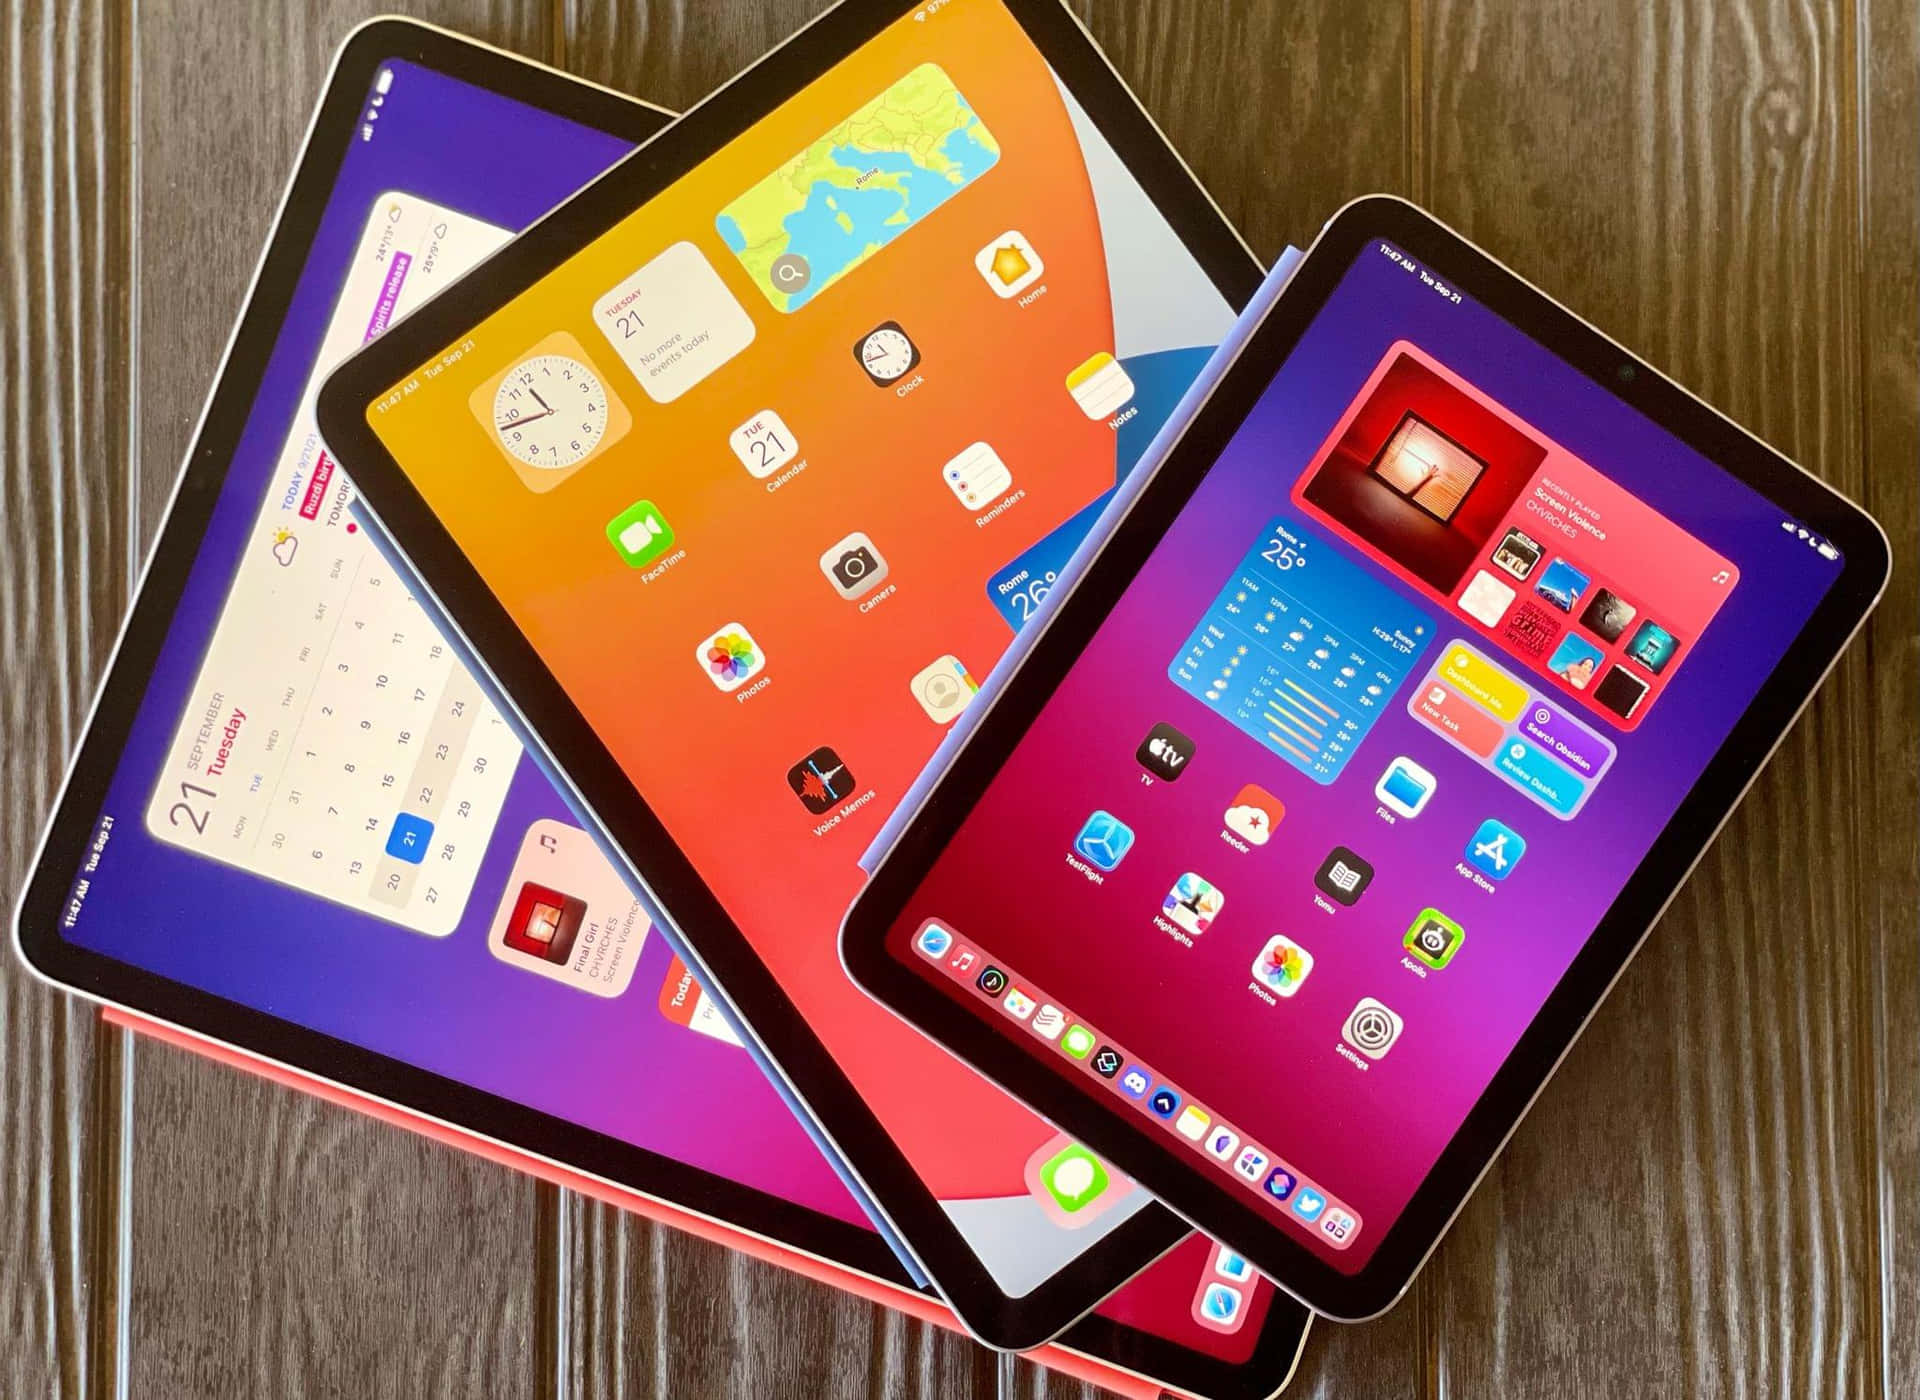 Stay connected with the latest iPad.